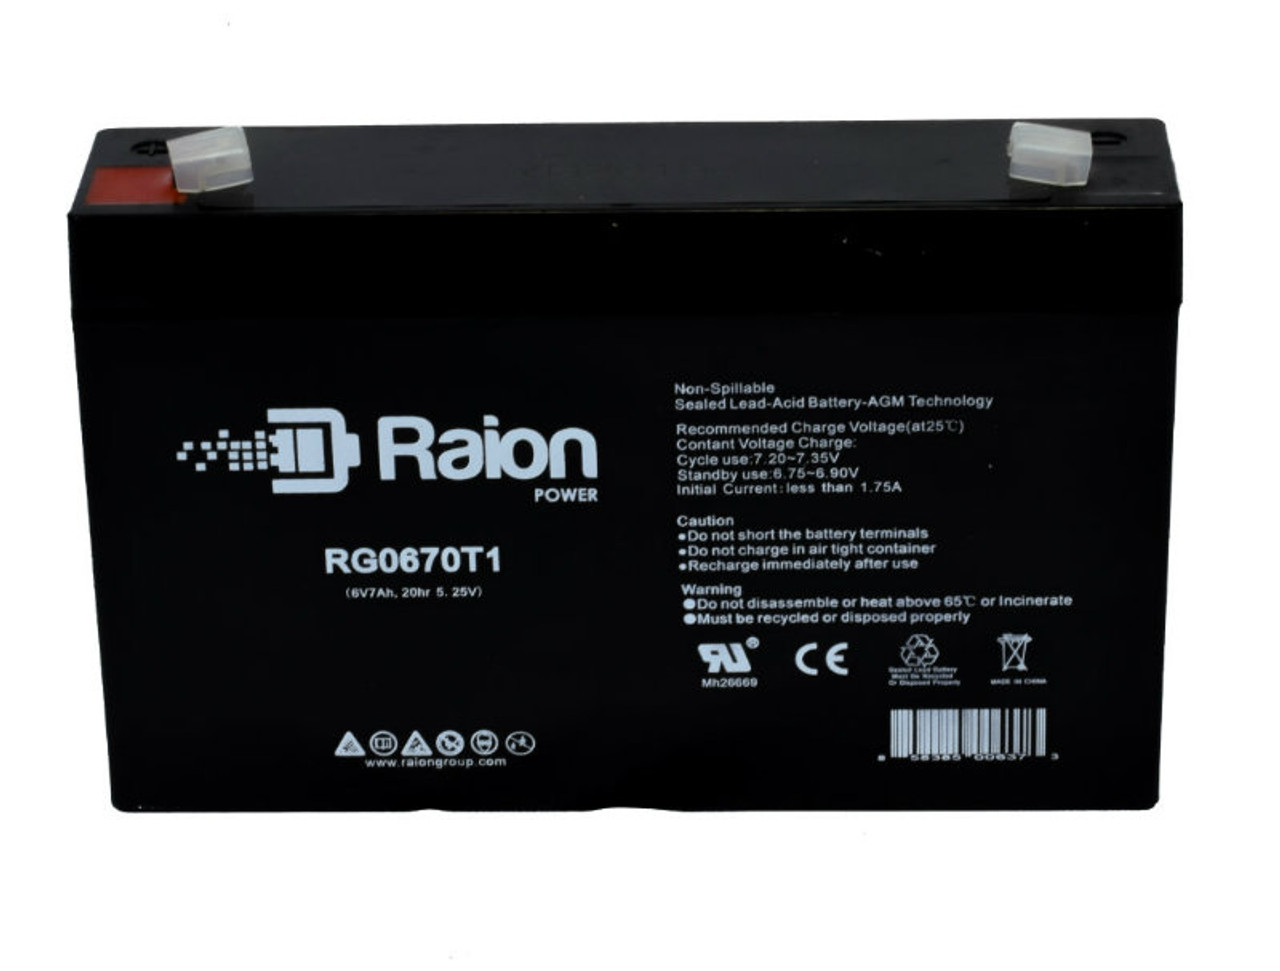 Raion Power RG0670T1 Replacement Battery Cartridge for Fisher-Price Power Wheels CDD26 Kawasaki Lil Quad with Track